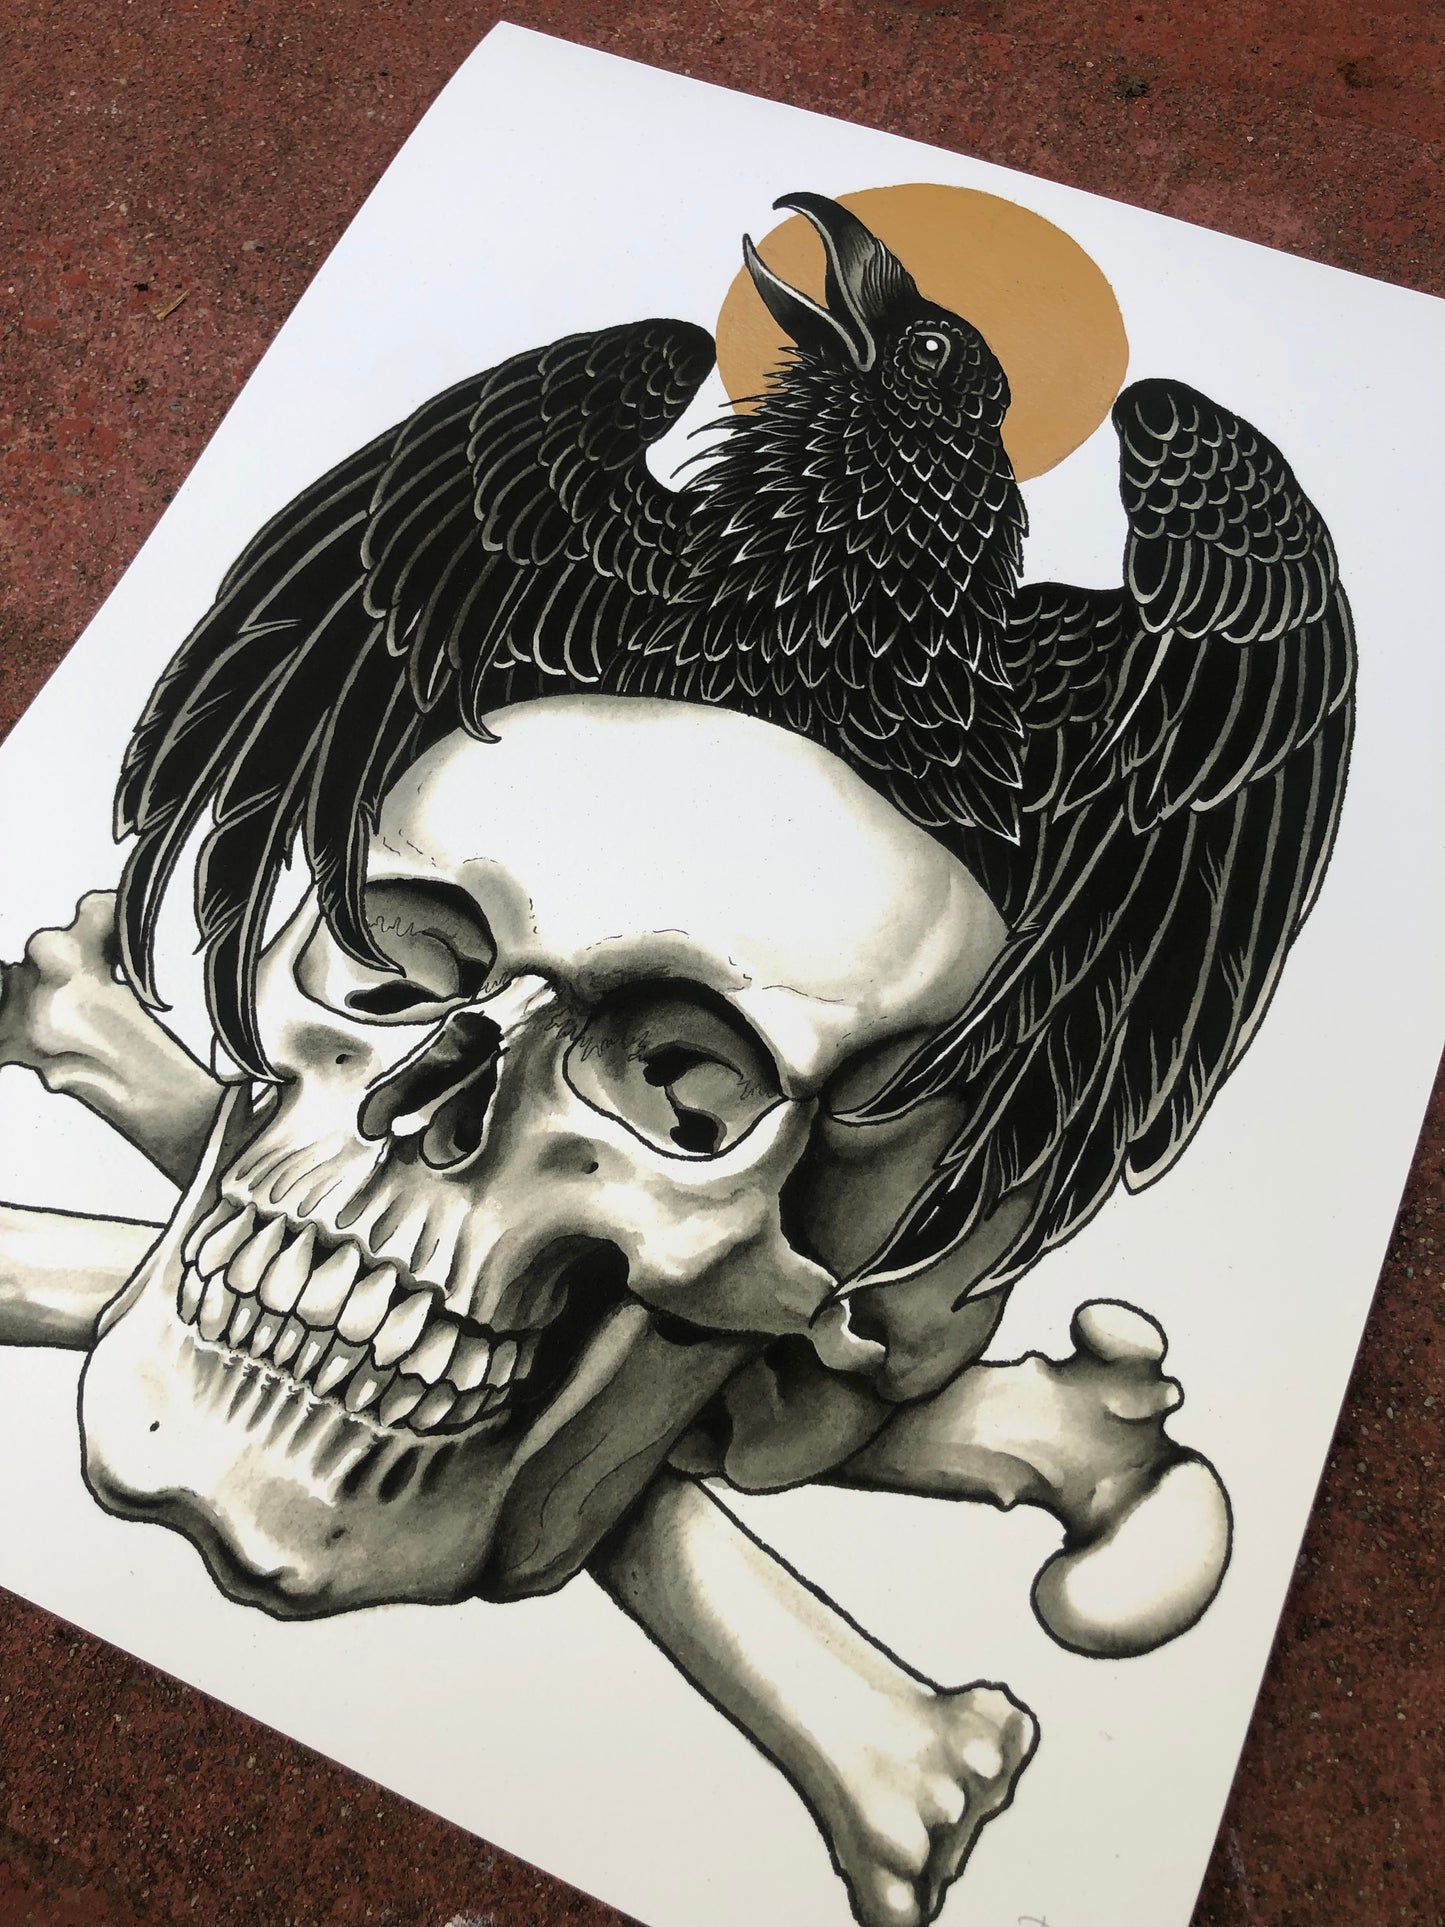 Phil Geck "Crow and Skull" Print (2021)